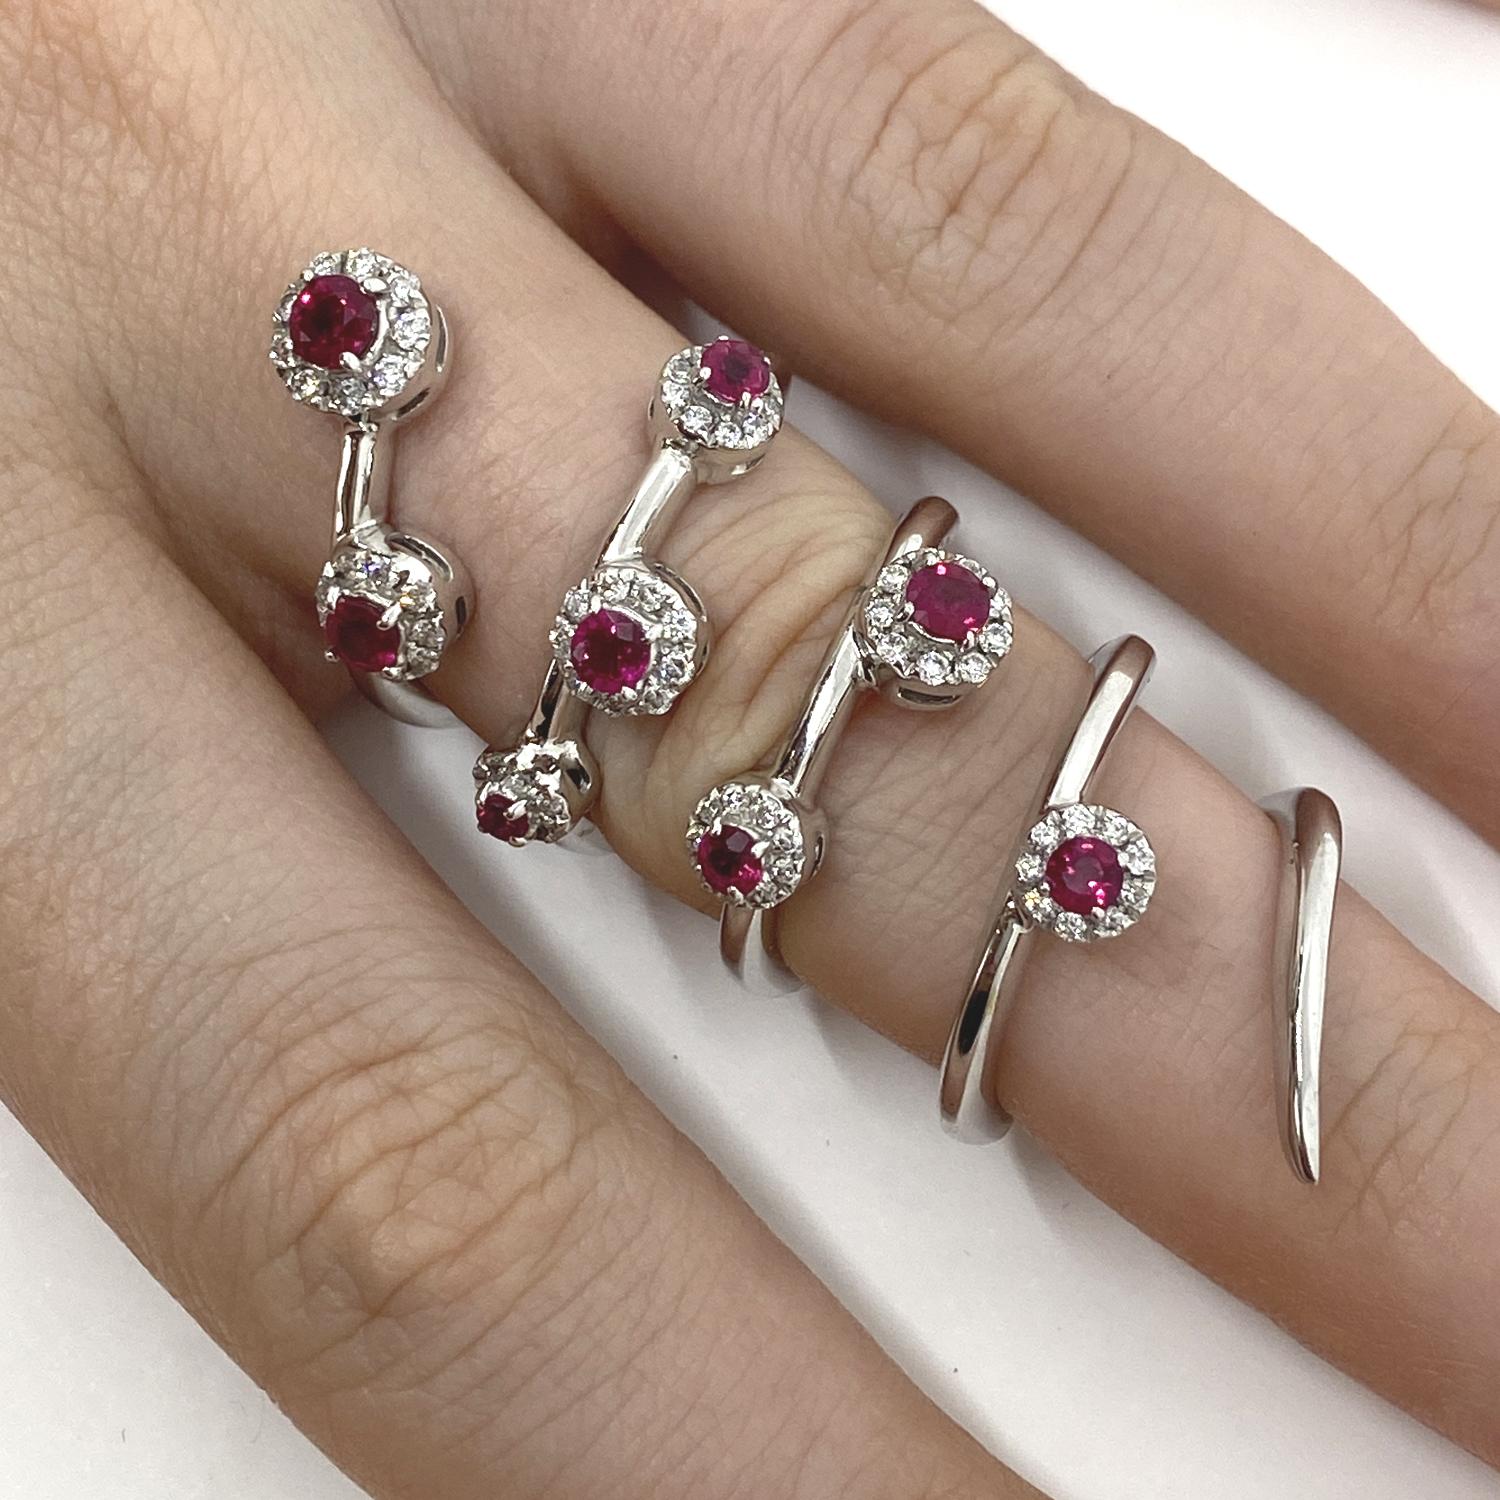 Snake jointed model ring made of 18kt white gold with natural brilliant-cut diamonds for ct.0.62 and natural brilliant-cut rubies for ct.1.13

Welcome to our jewelry collection, where every piece tells a story of timeless elegance and unparalleled